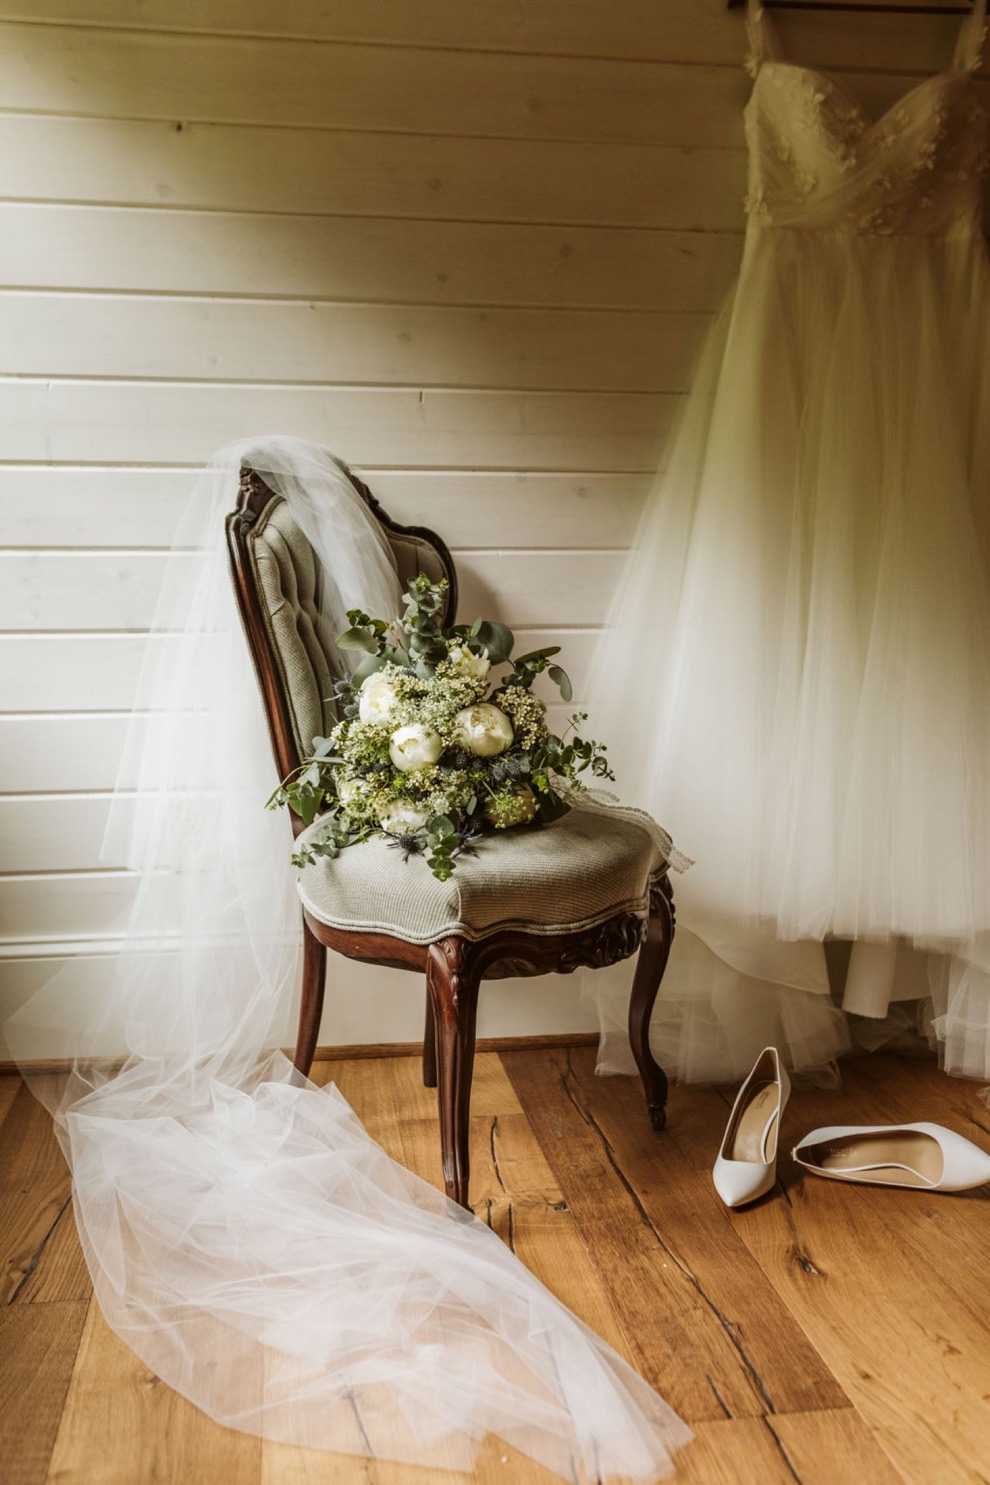 Wedding dress hangs on a shiplap wall with veil and bouquet sitting on an antique chair. White shoes lie on wood plank floor.